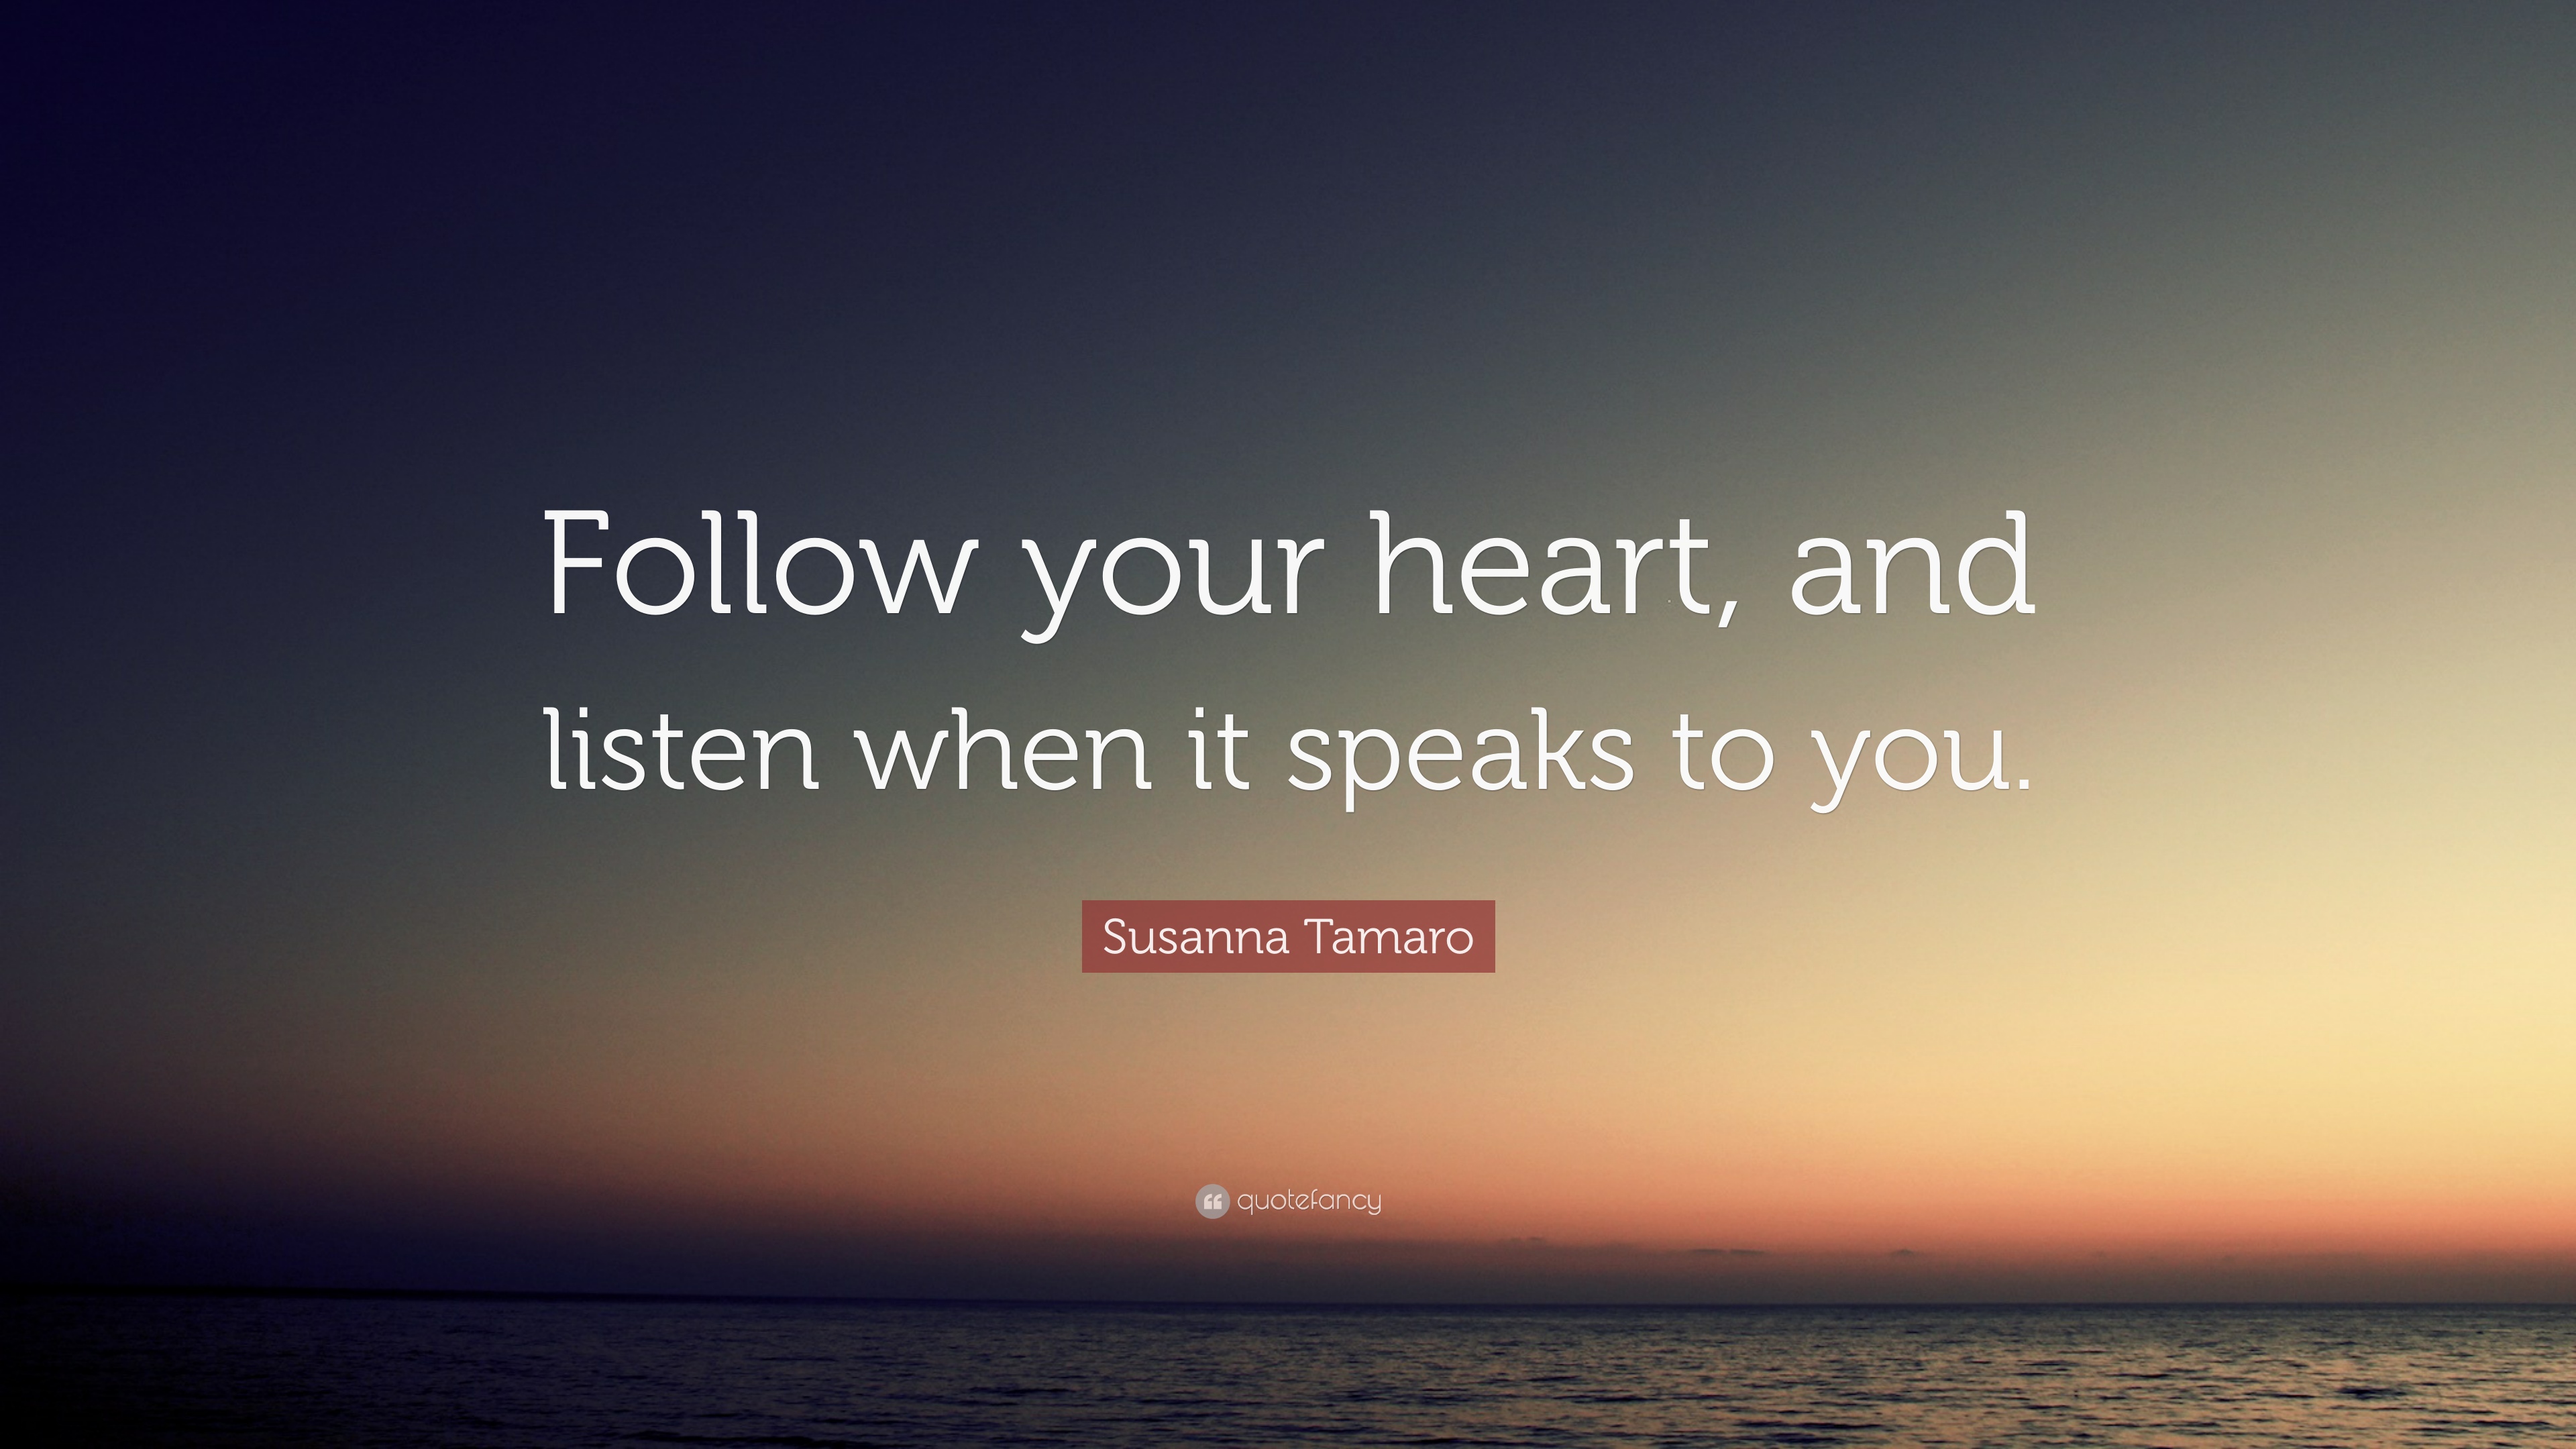 Susanna Tamaro Quote: “Follow your heart, and listen when it speaks ...